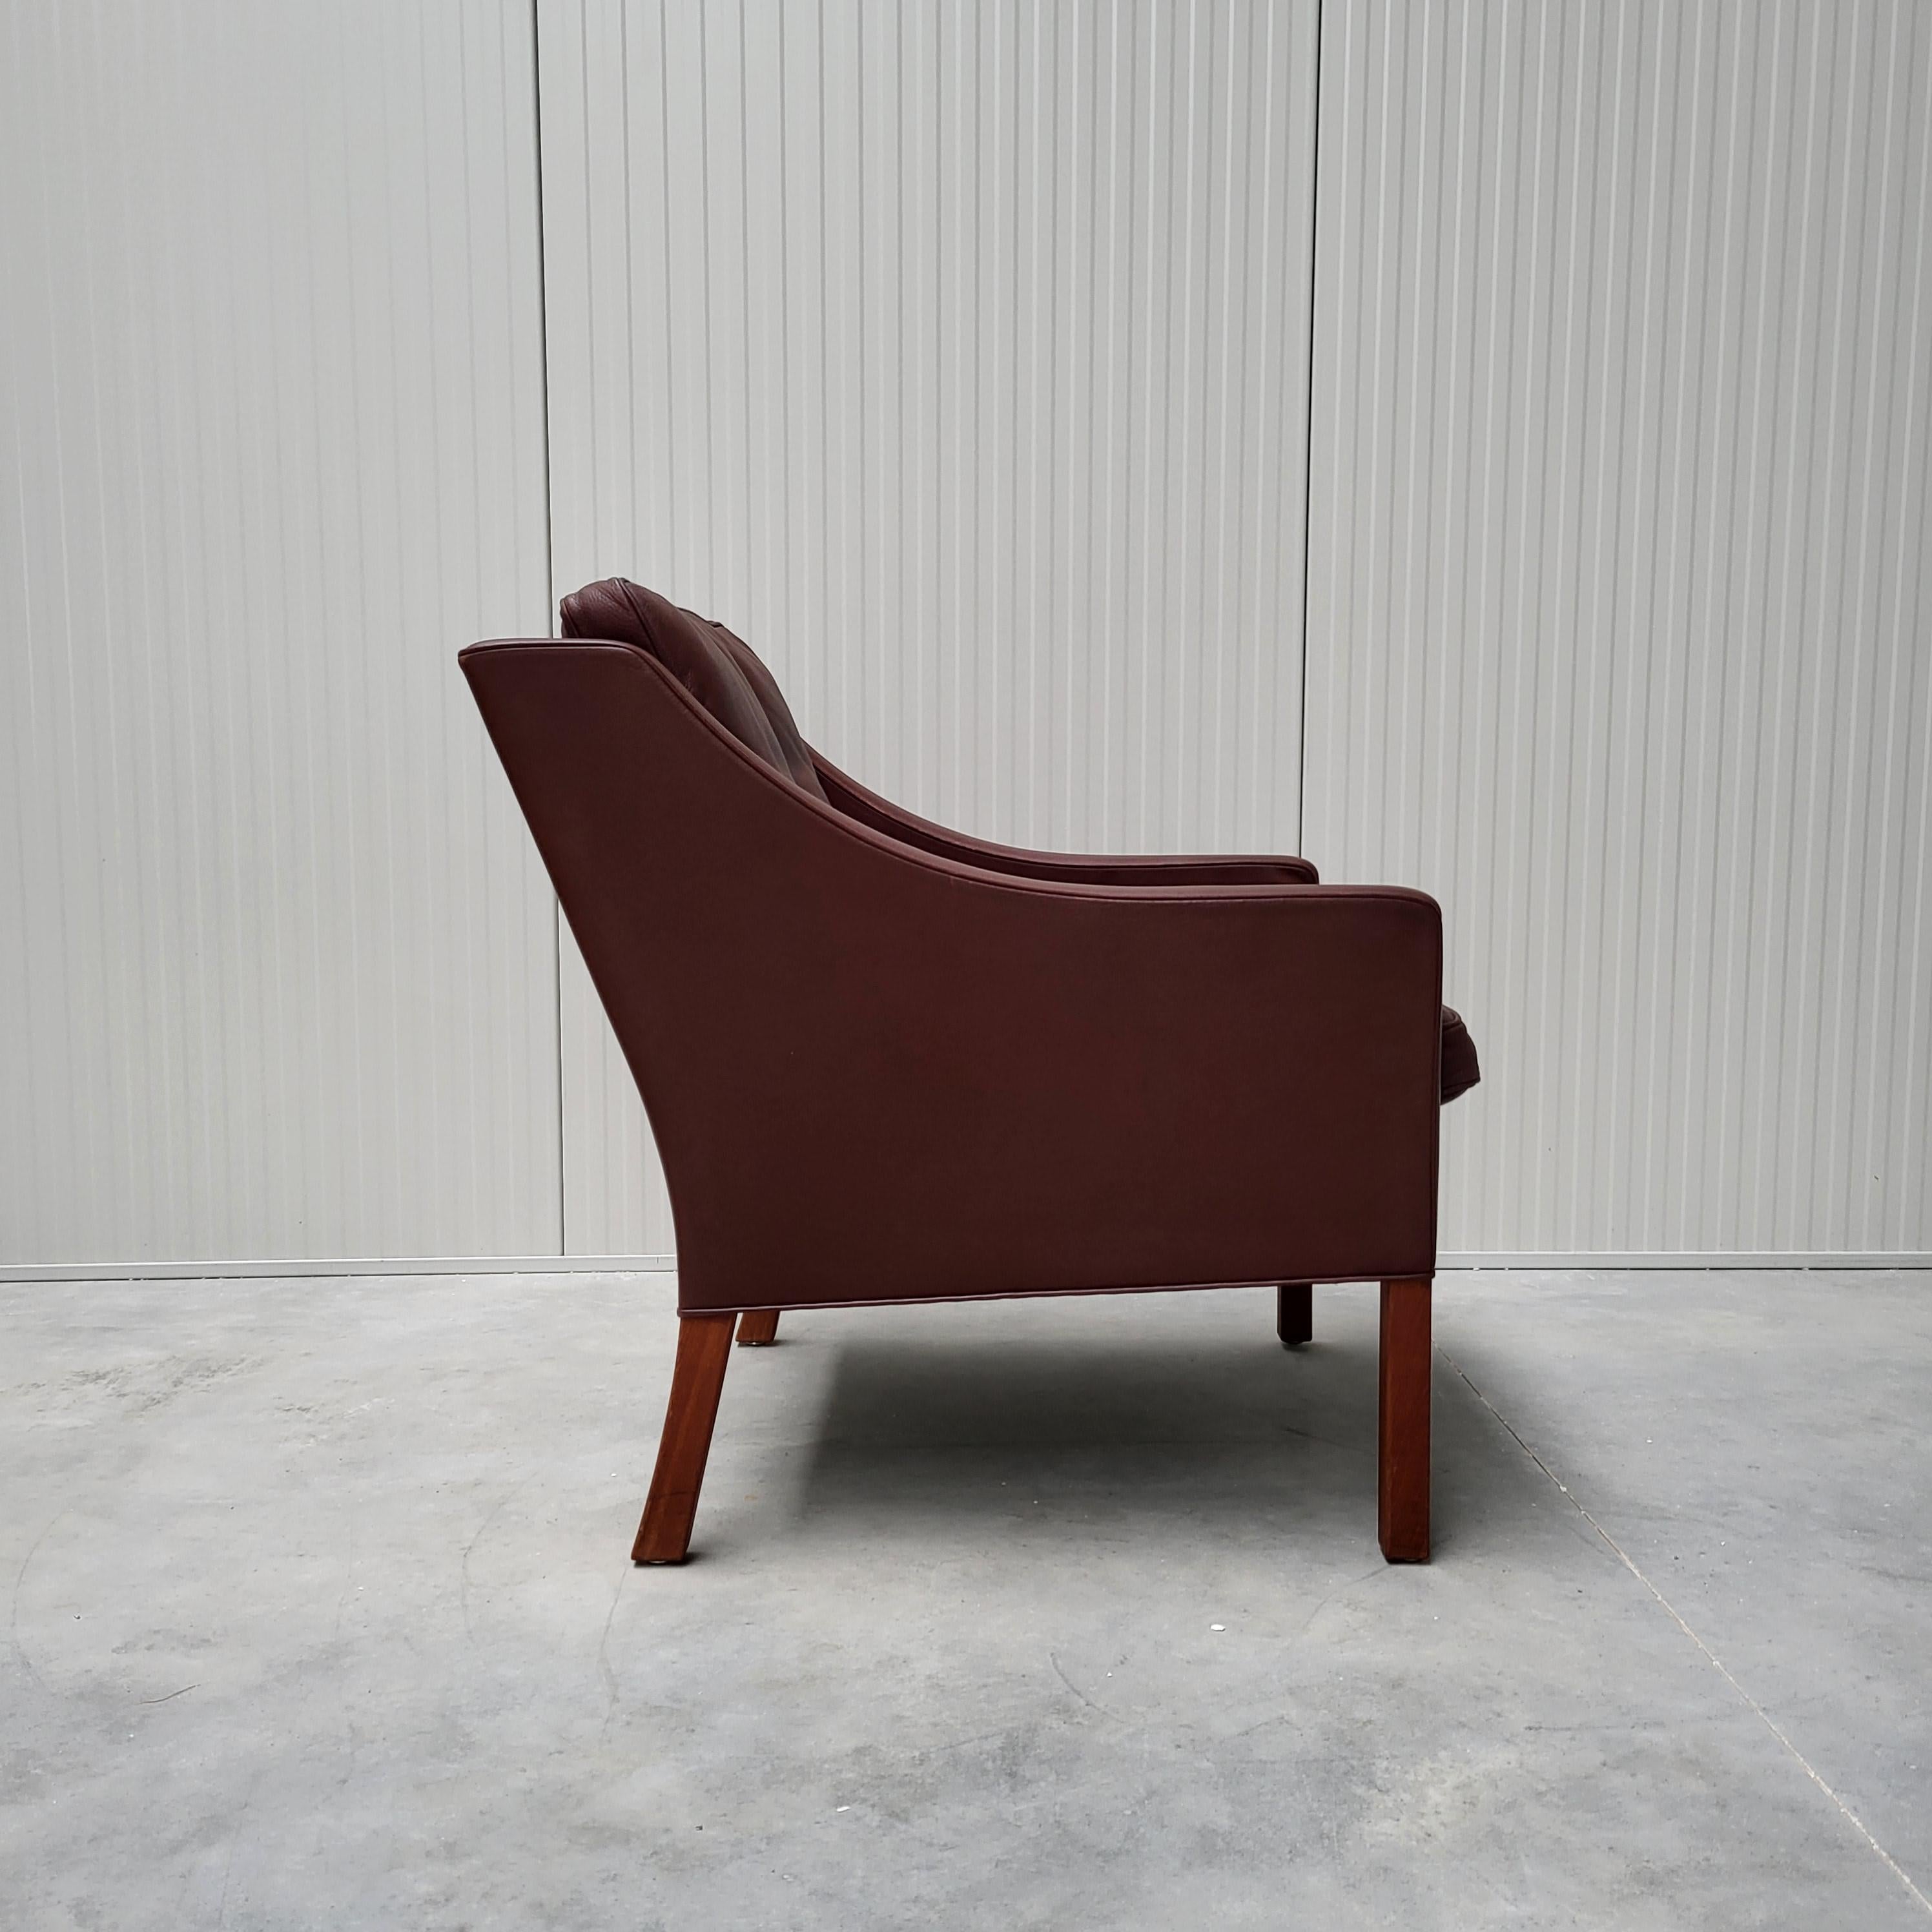 Mid-20th Century Børge Mogensen for Fredericia Club Chairs Mod. 2207 Denmark 1960s